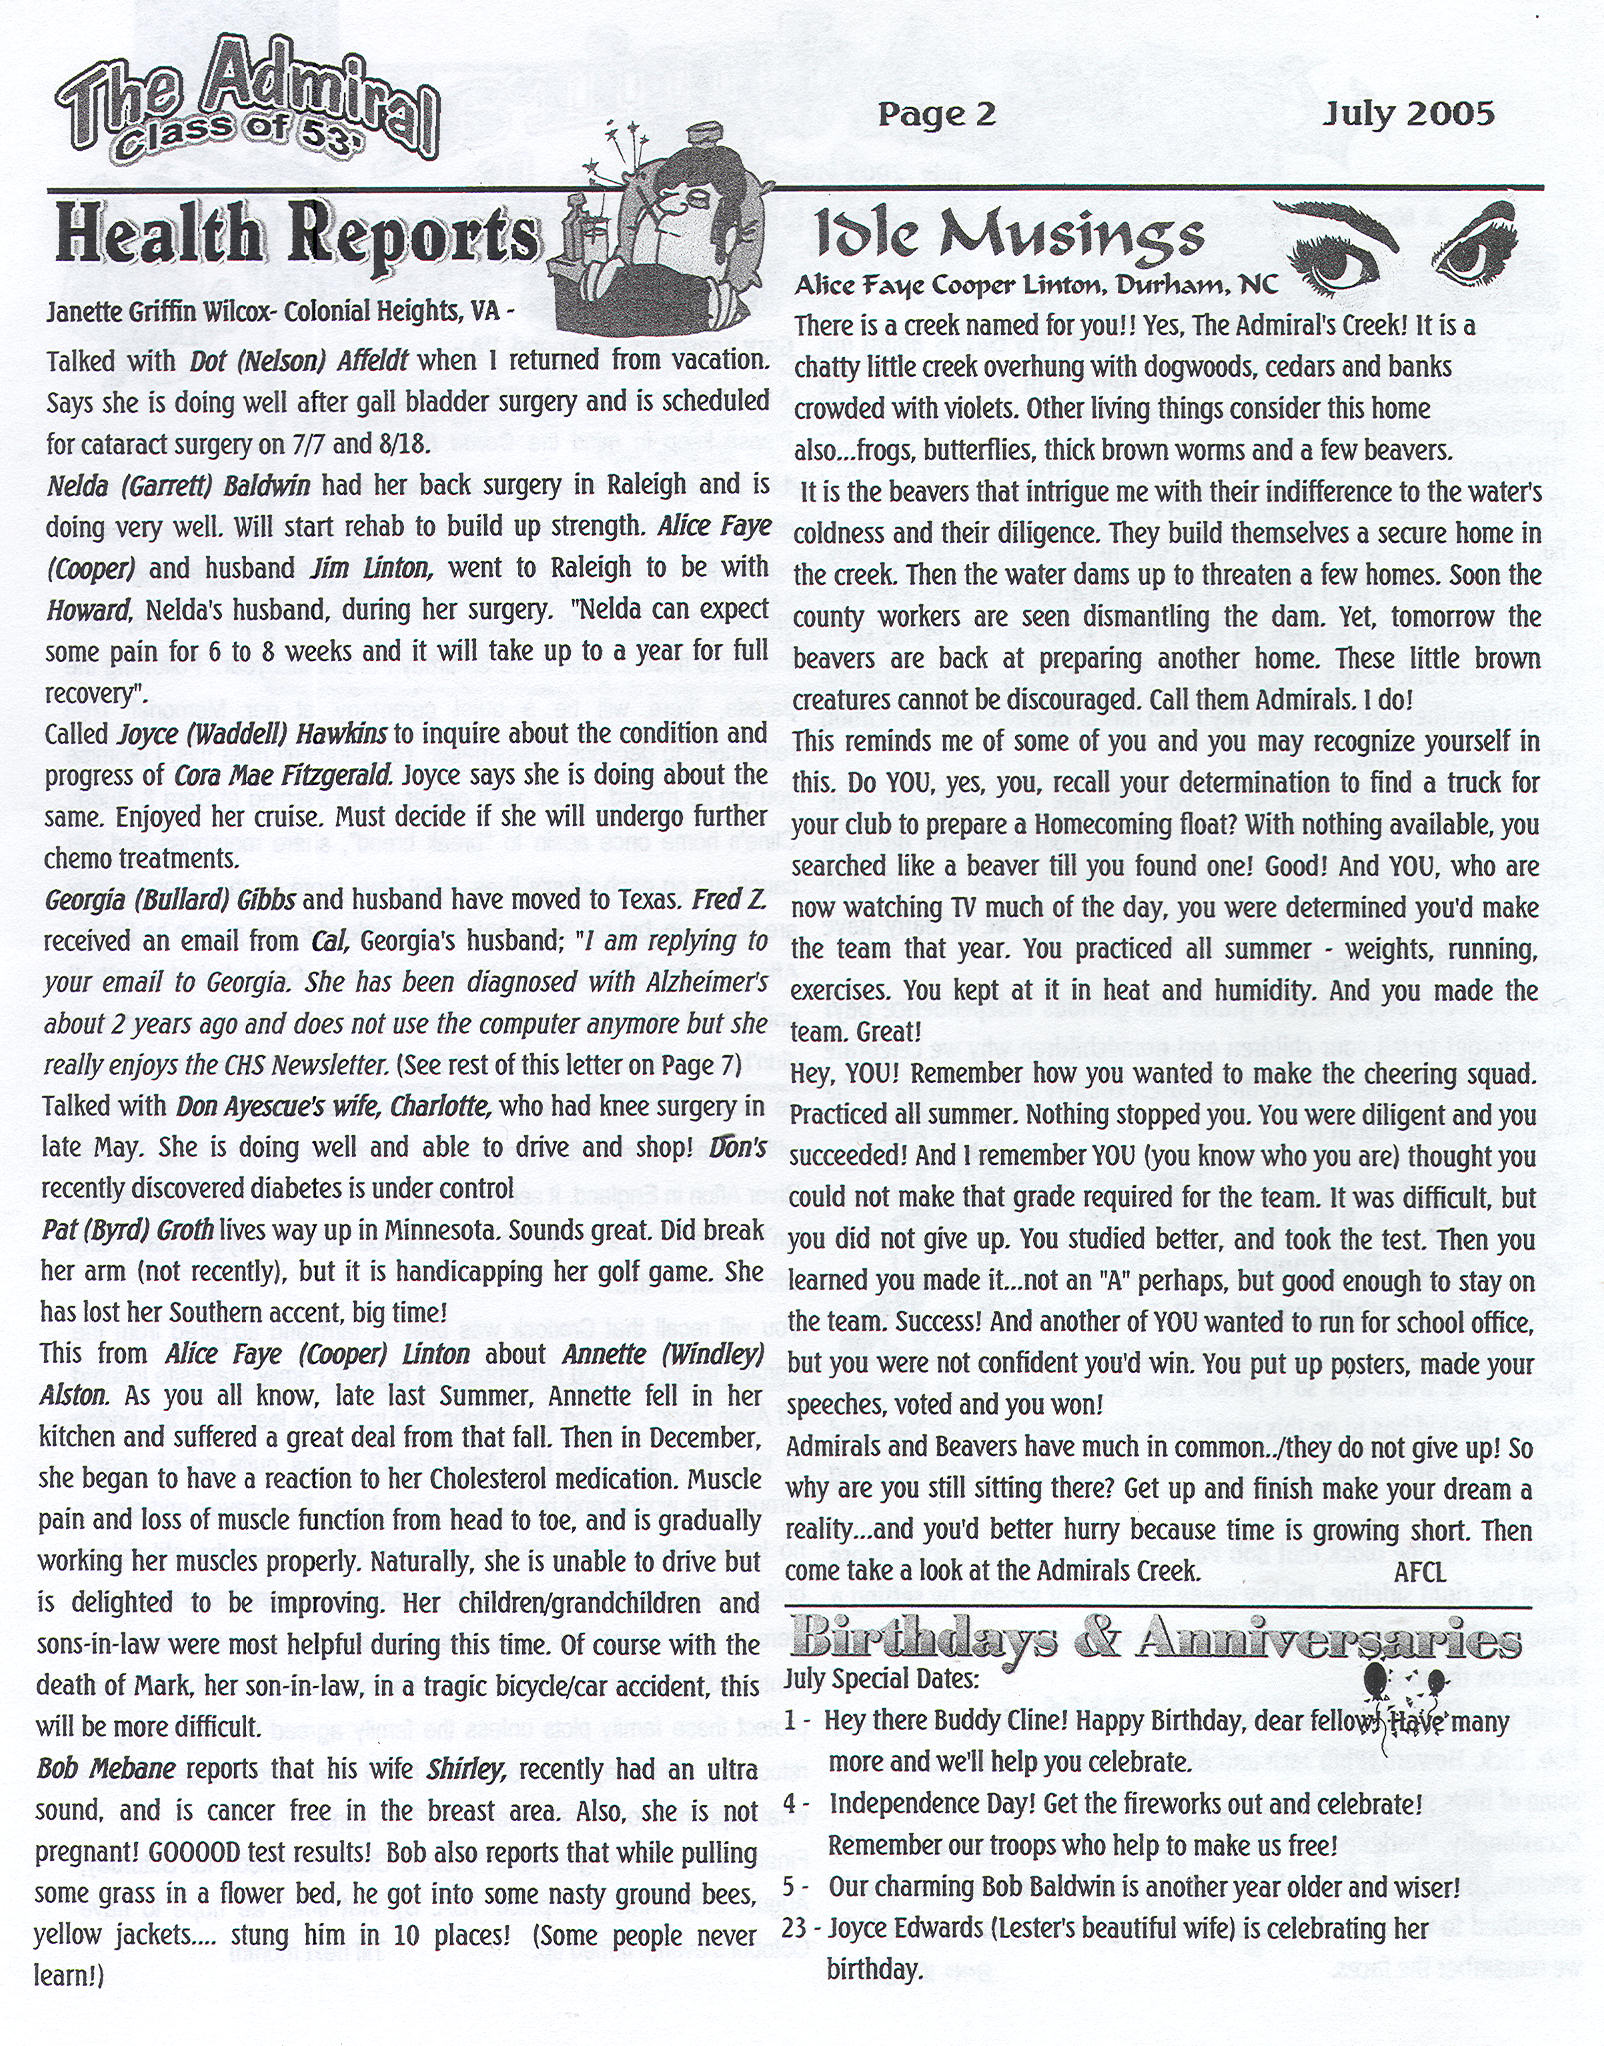 The Admiral - July 2005 - pg. 2